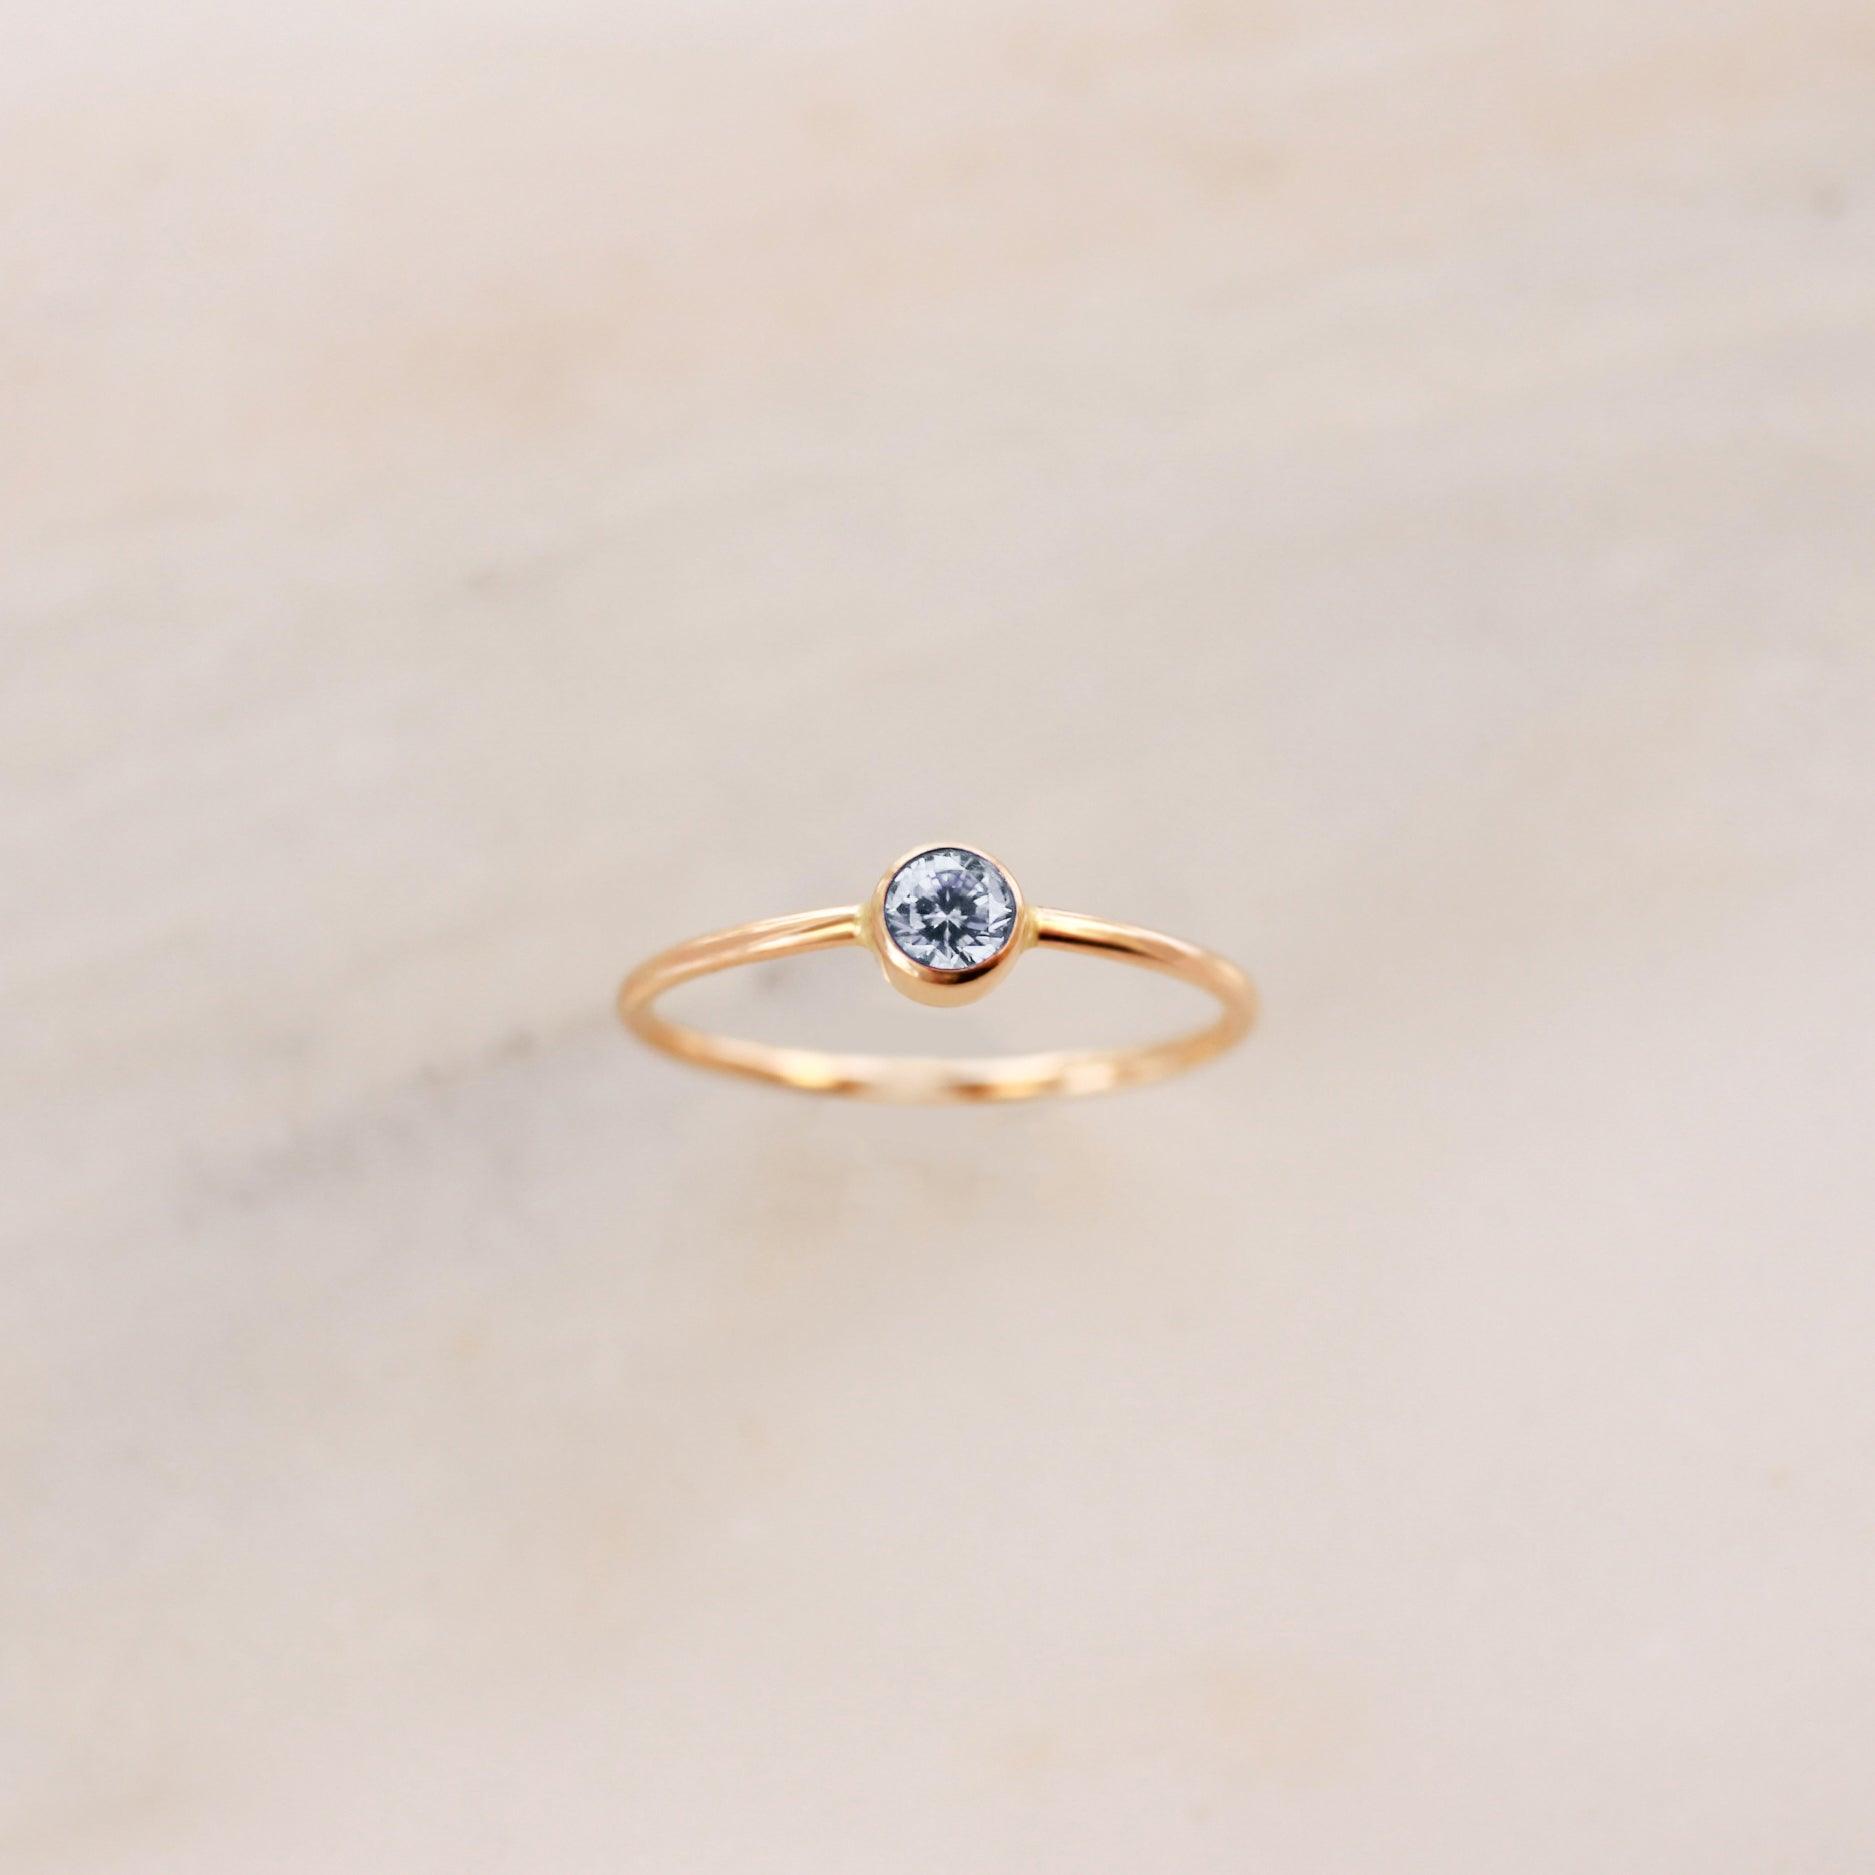 March Birthstone Ring ∙ Aquamarine - Nolia Jewelry - Meaningful + Sustainably Handcrafted Jewelry